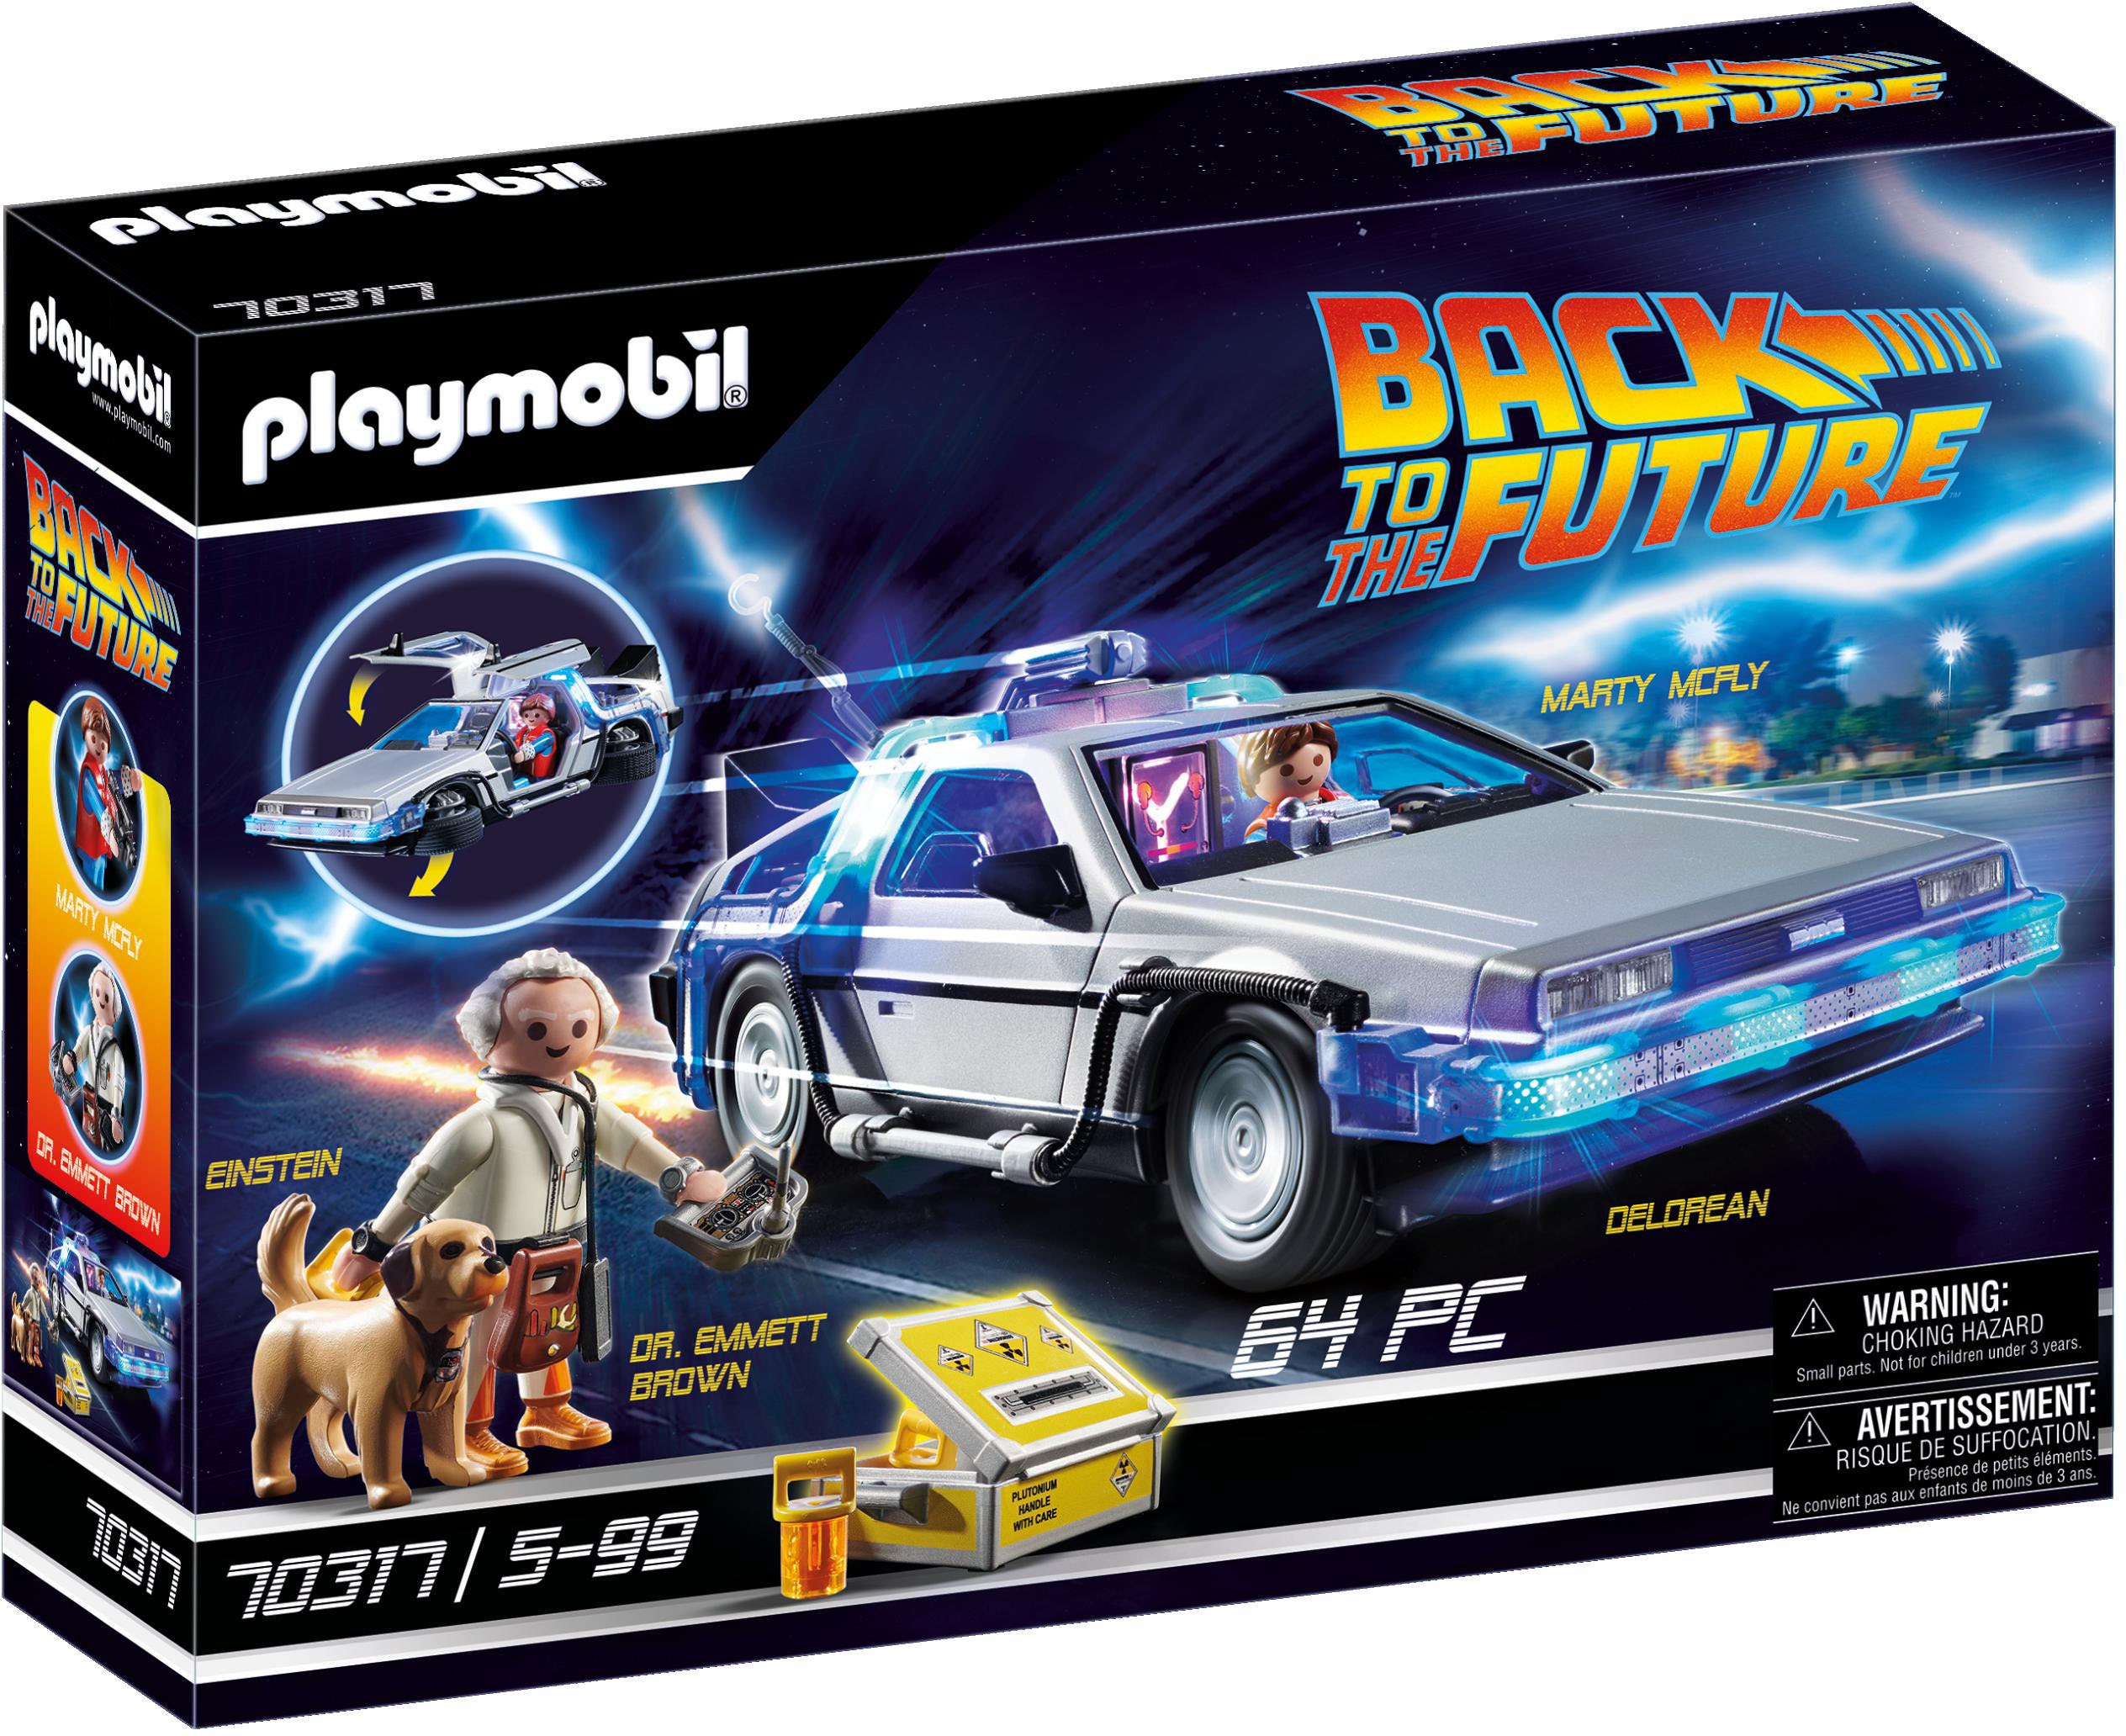 Playmobil Konstruktions-Spielset Back to the Future DeLorean (70317),Playmobil Back to the Future, (64 St.), Made in Germany